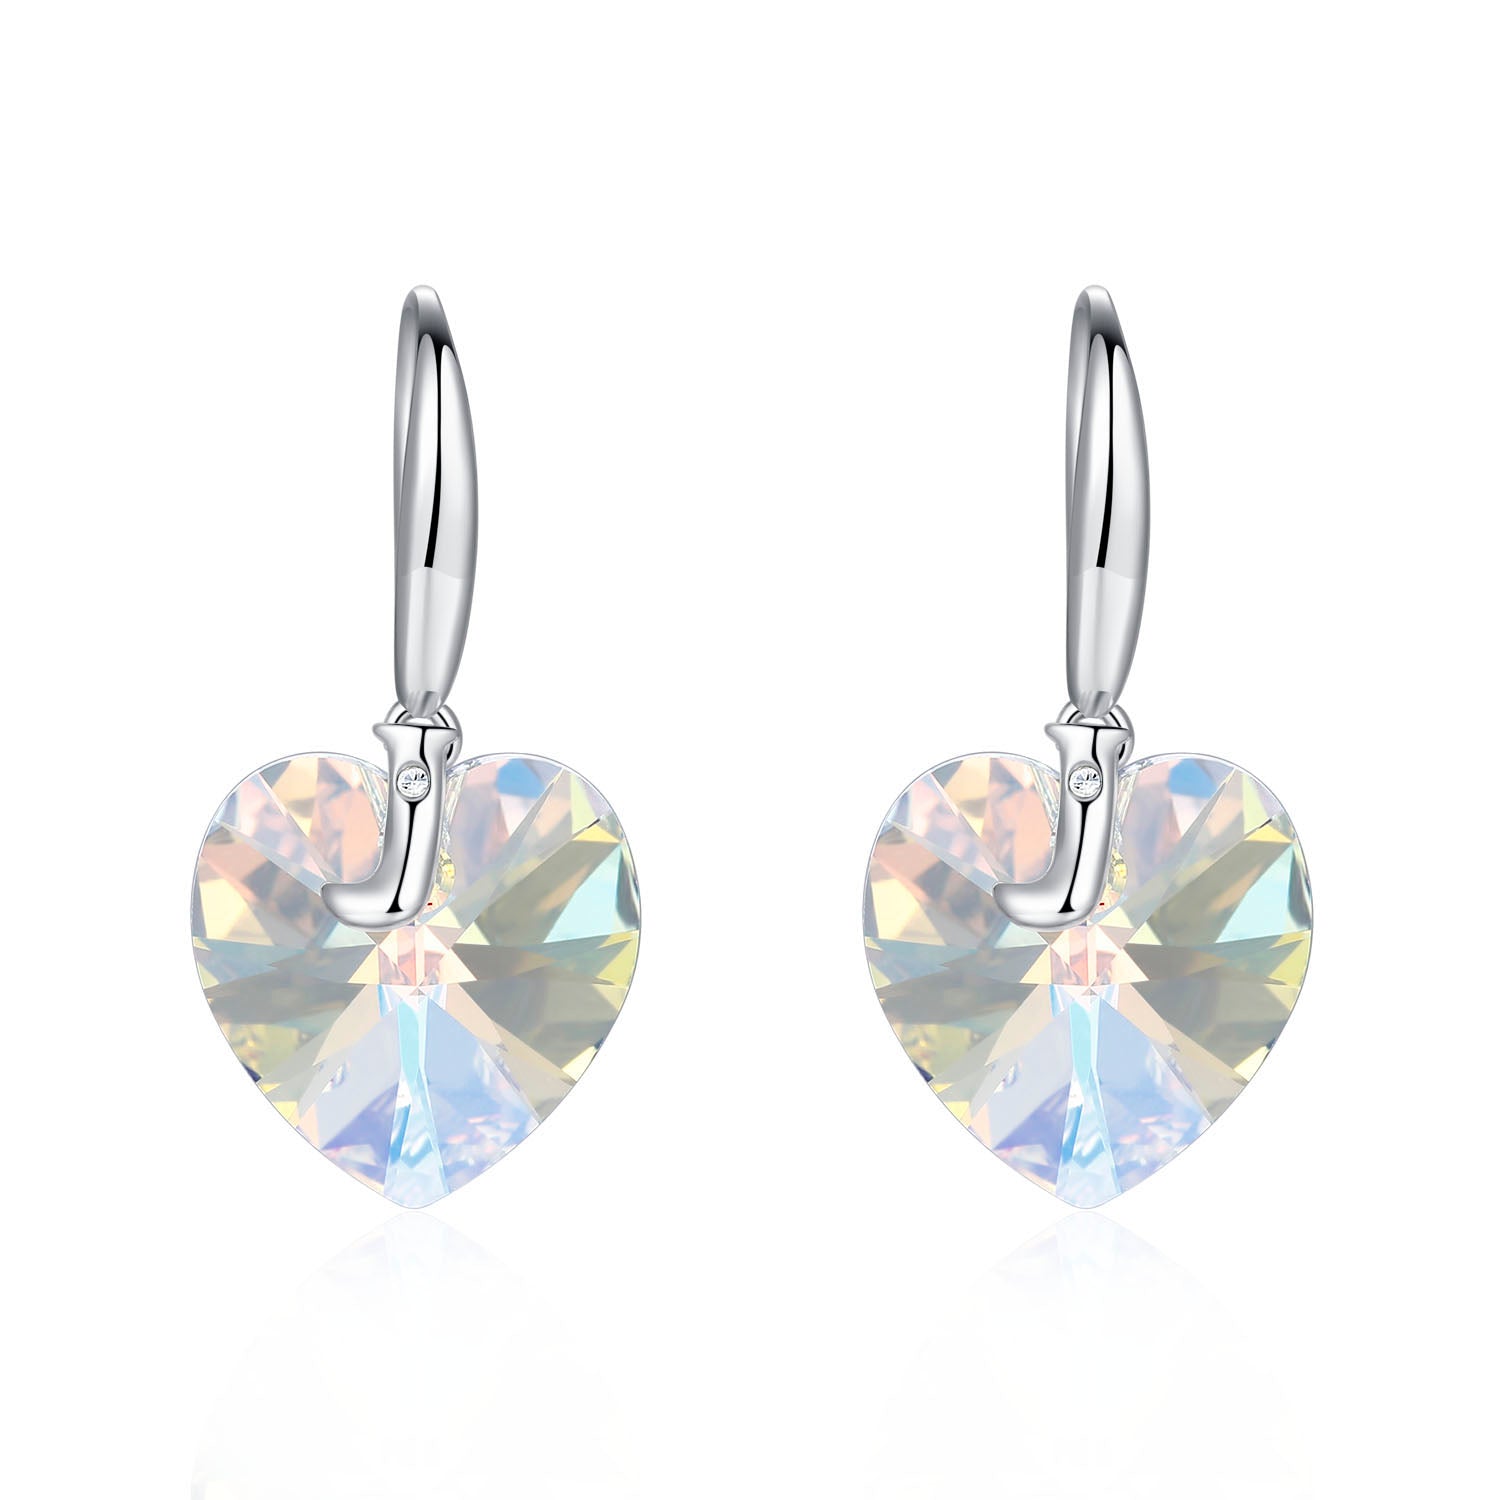 Planet J 925 Sterling Silver Heart Earrings with Swarovski Elements Crystals